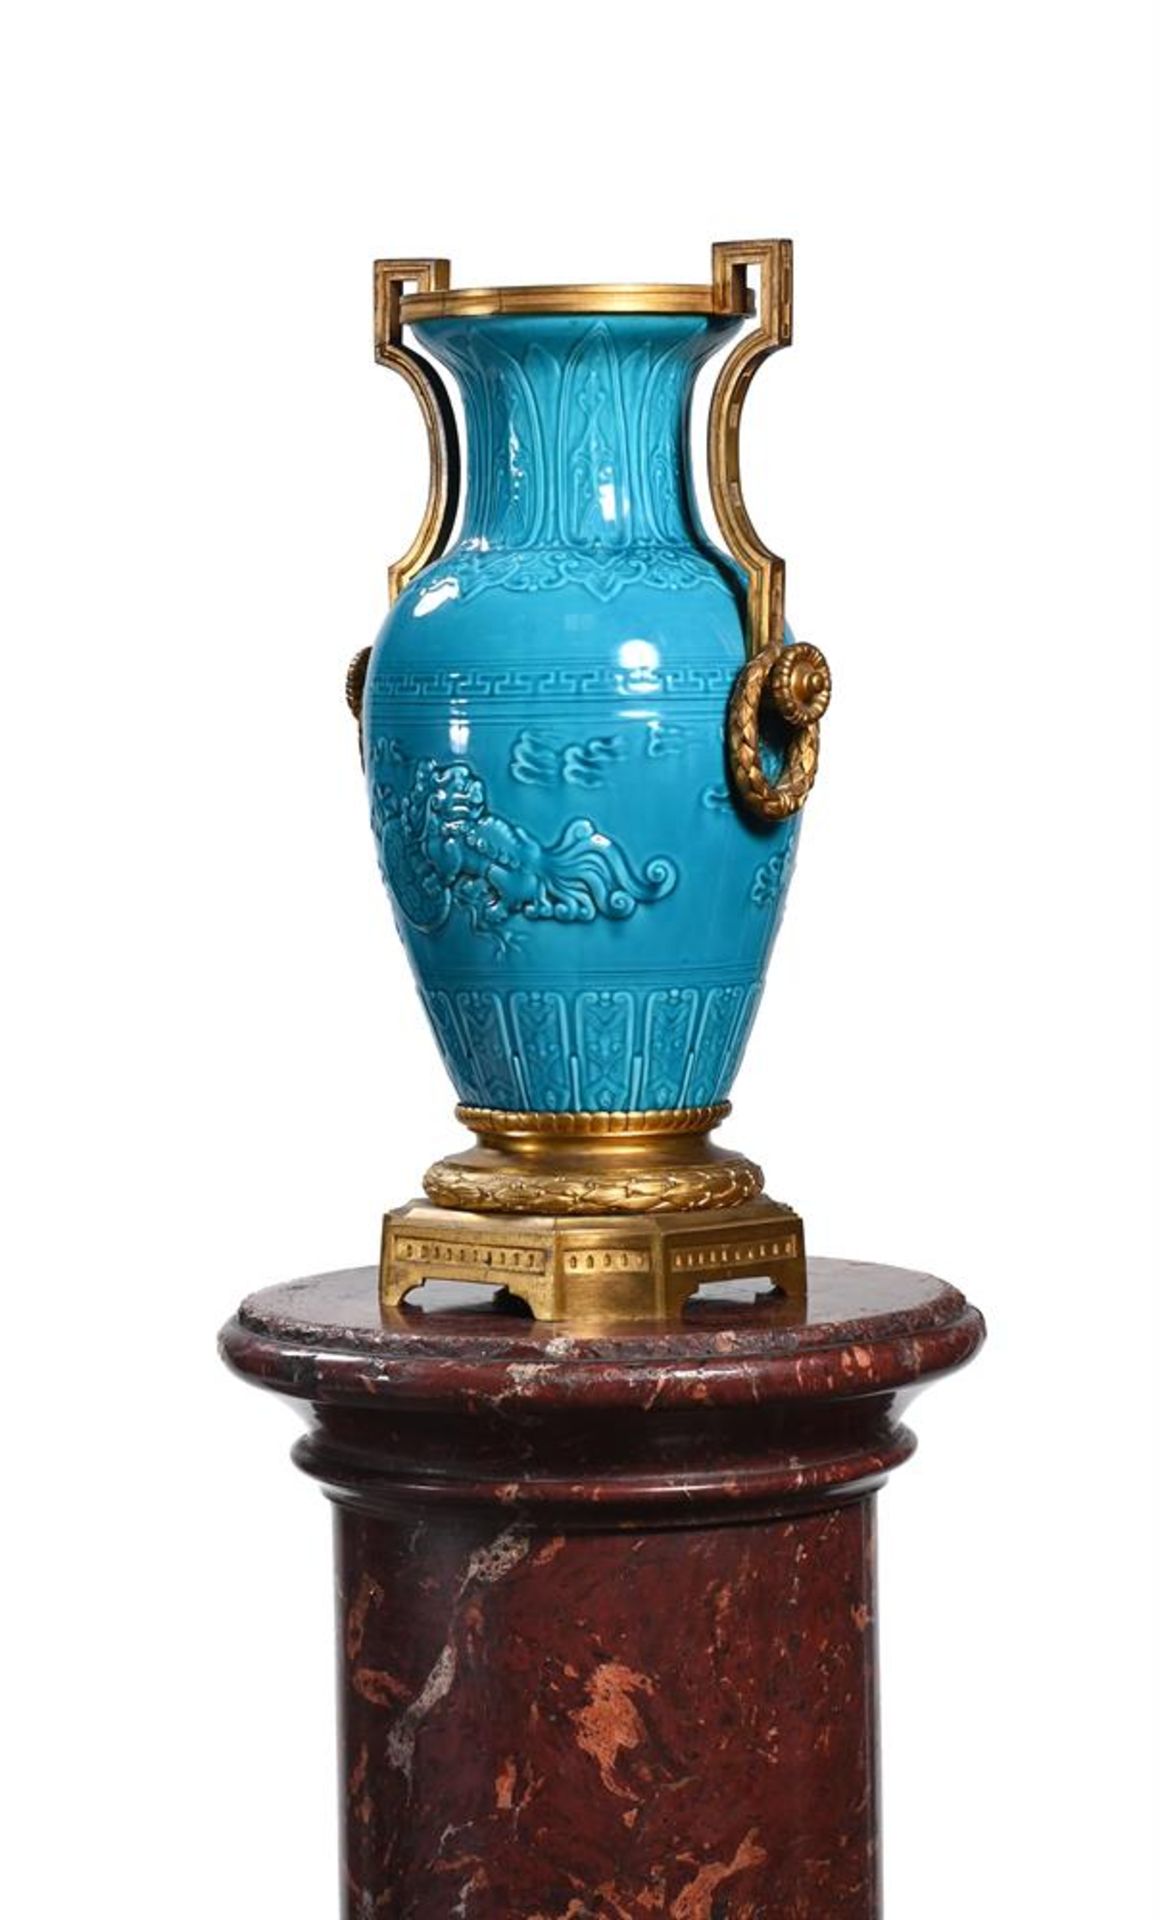 A FRENCH ORMOLU MOUNTED CHINOISERIE VASE, ATTRIBUTED TO THEODORE DECK, LATE 19TH CENTURY - Image 2 of 3